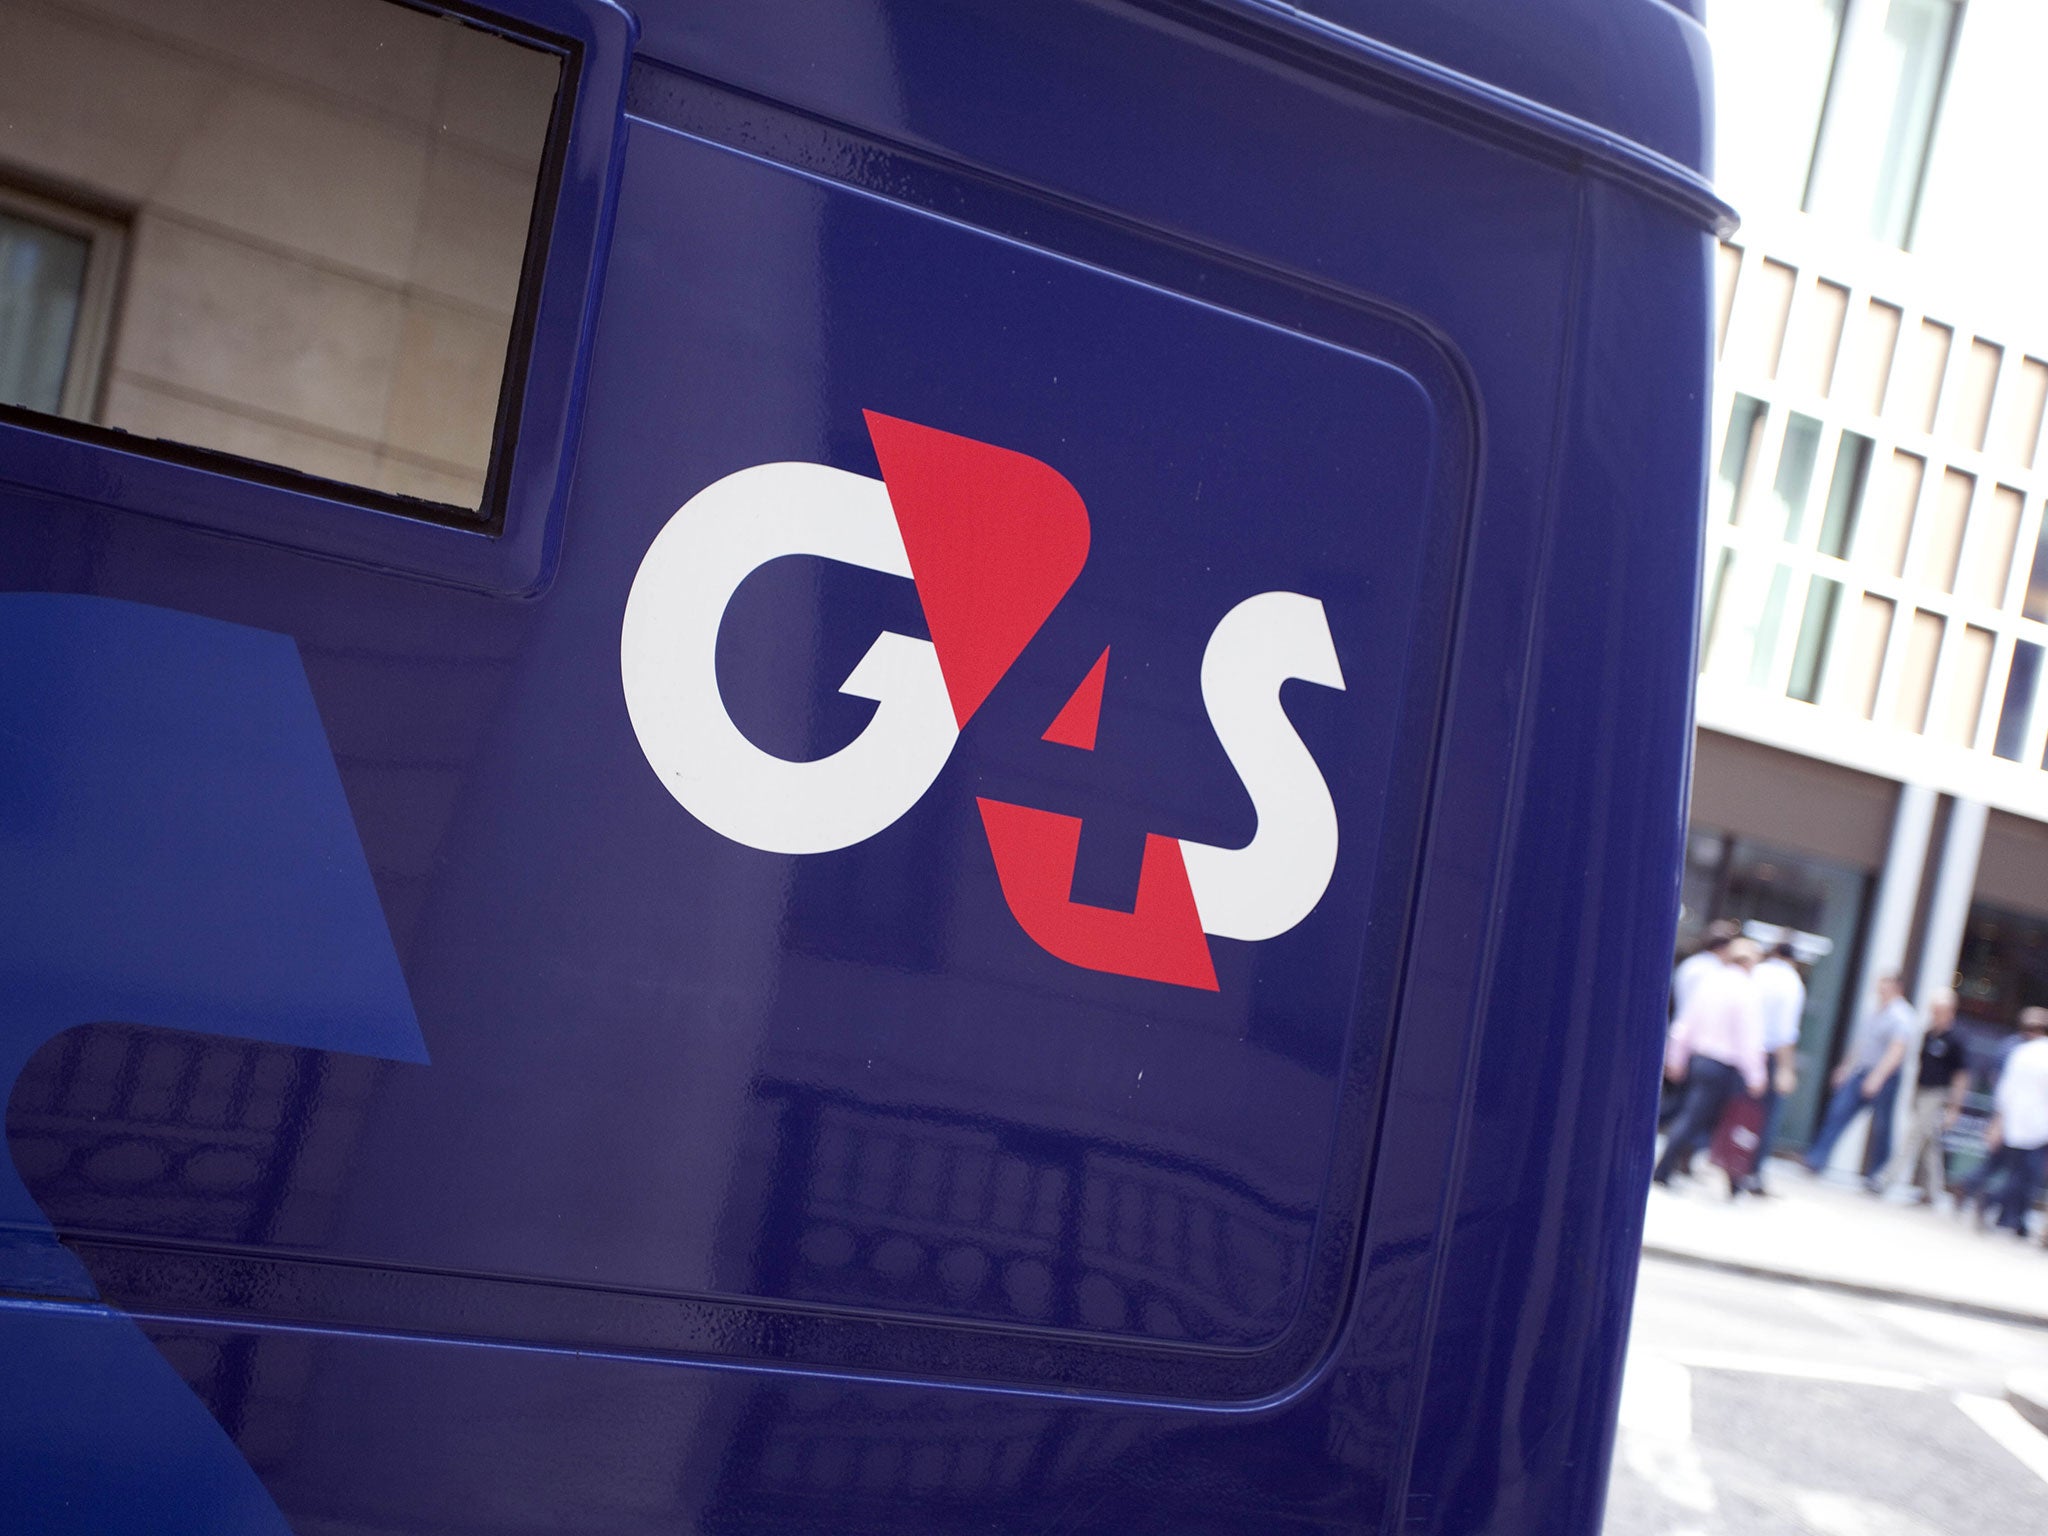 G4S runs many outsourced services